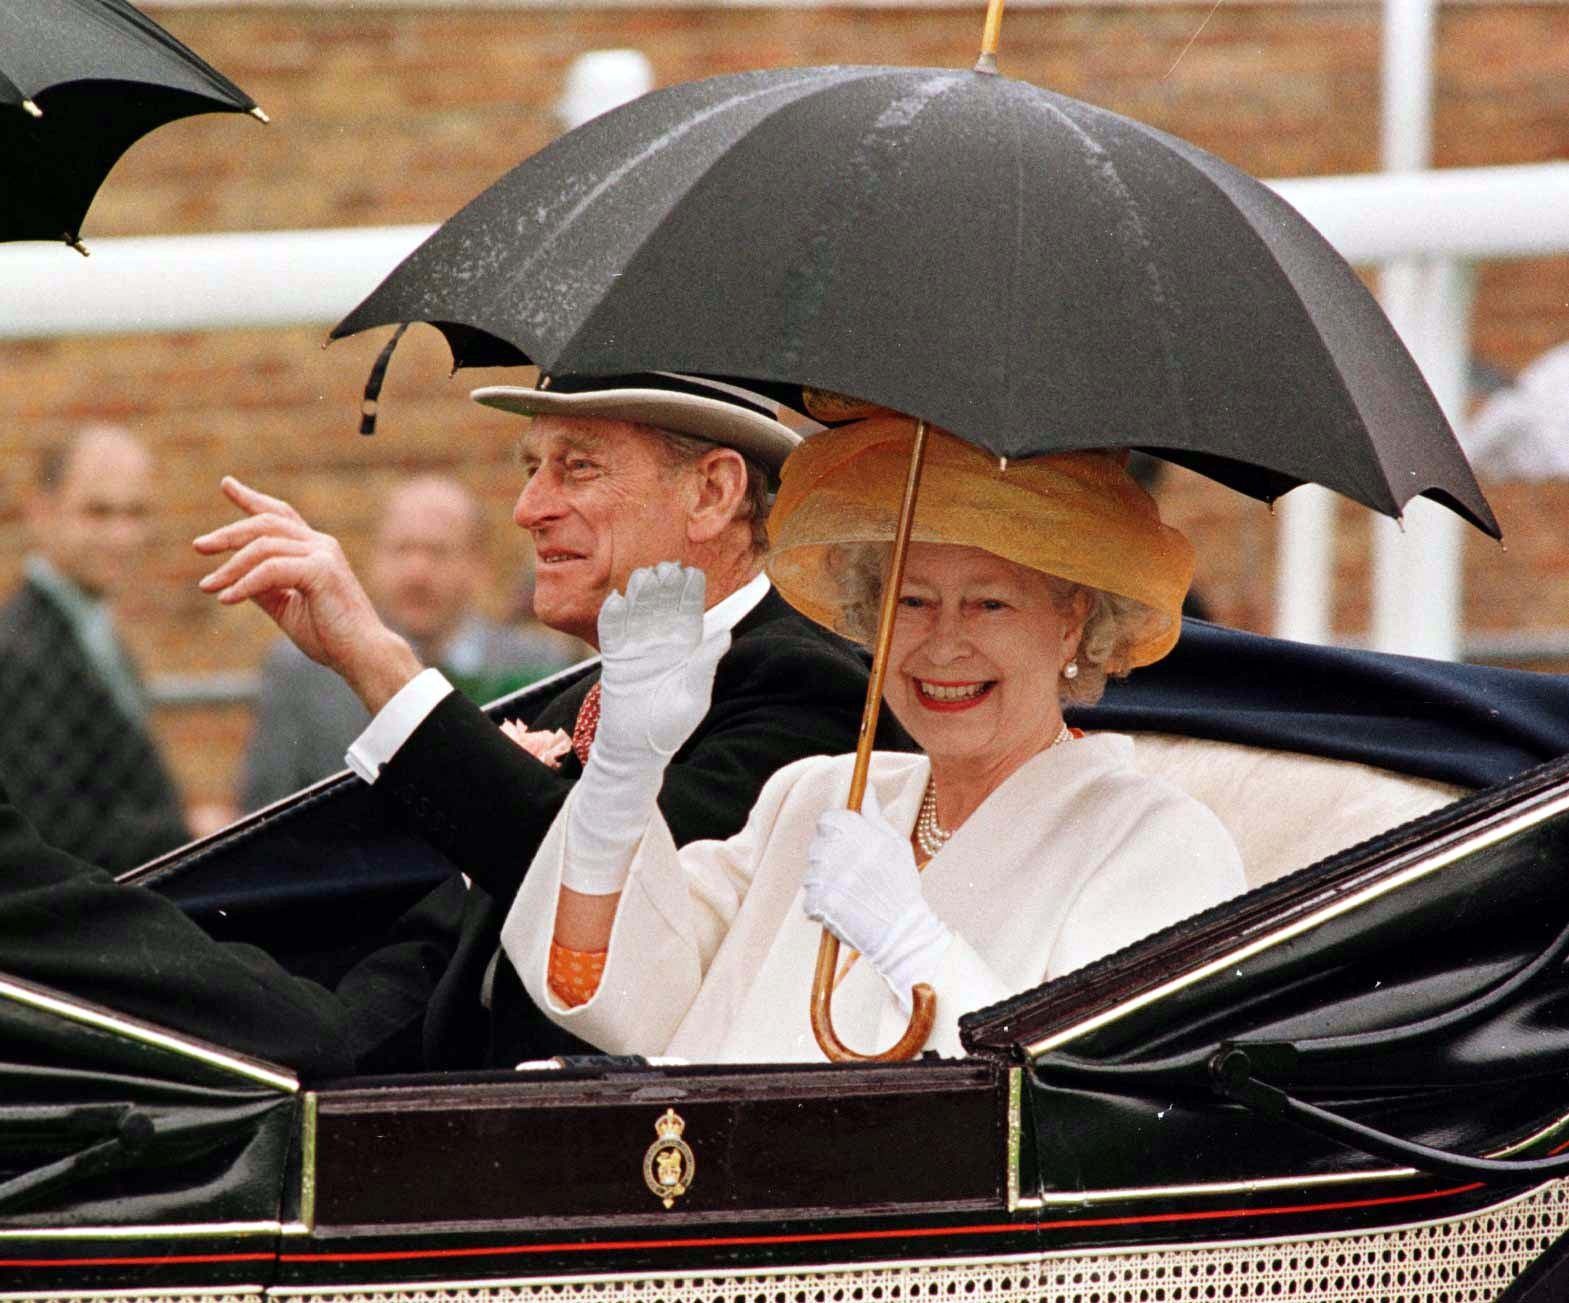 The Queen and Duke of Edinburgh arrive on the course at a rain-swept Royal Ascot